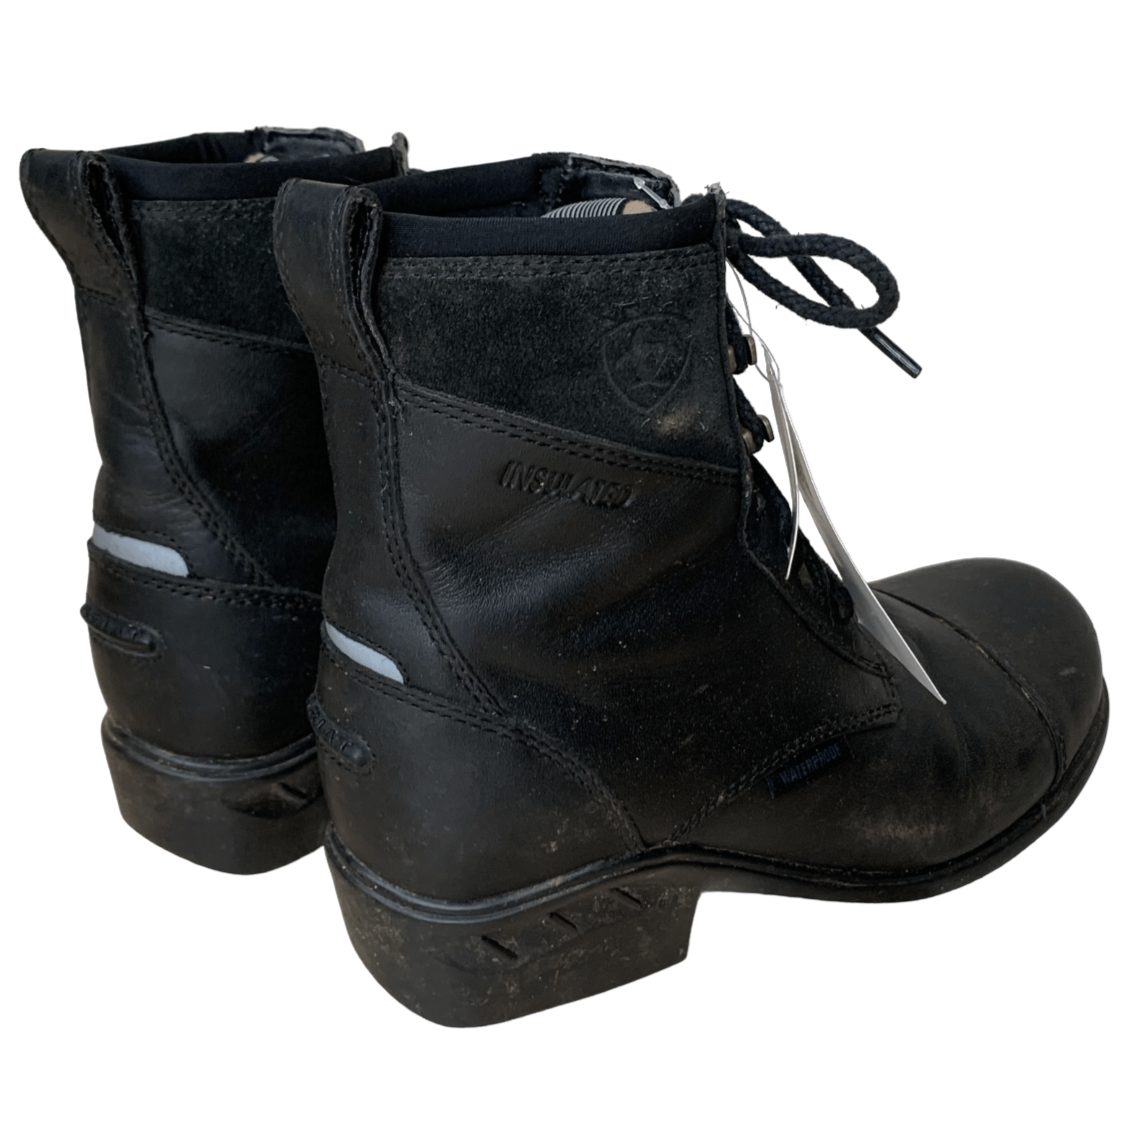 Ariat 'Extreme' Laced H20 Insulated Paddock Boots